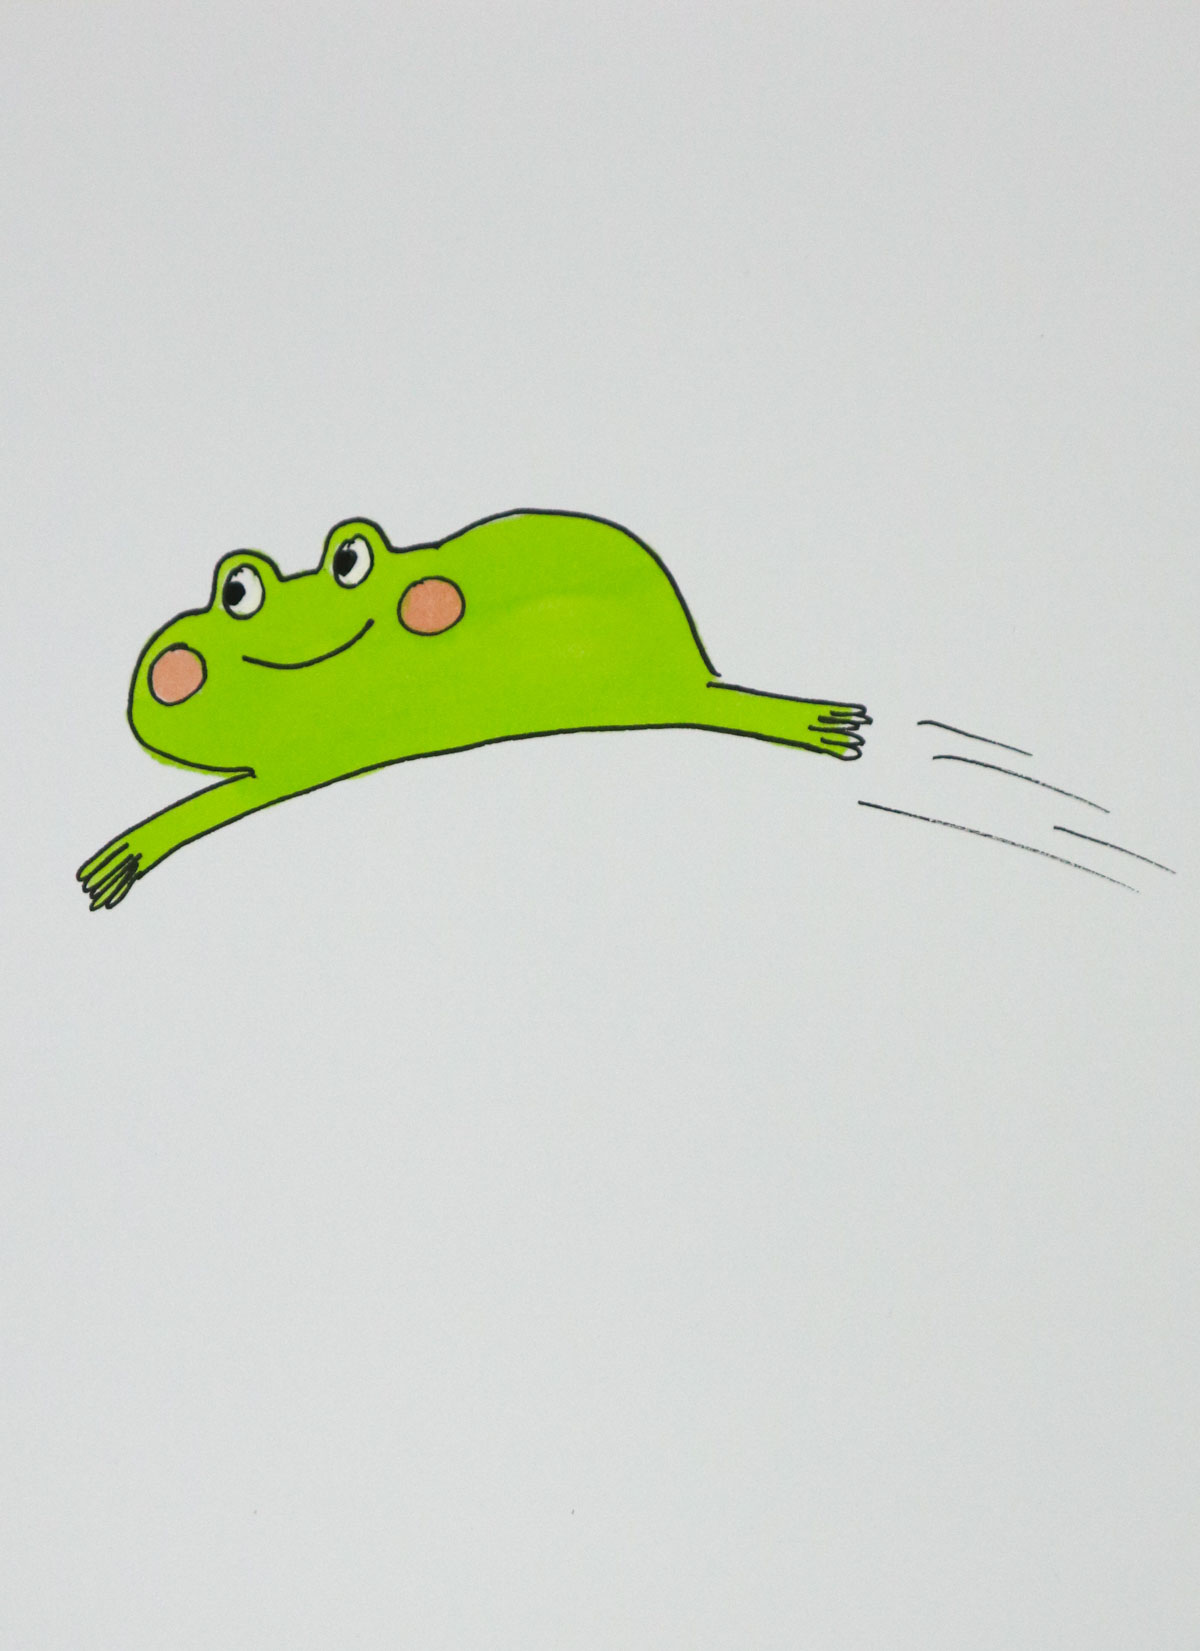 leap frog drawing